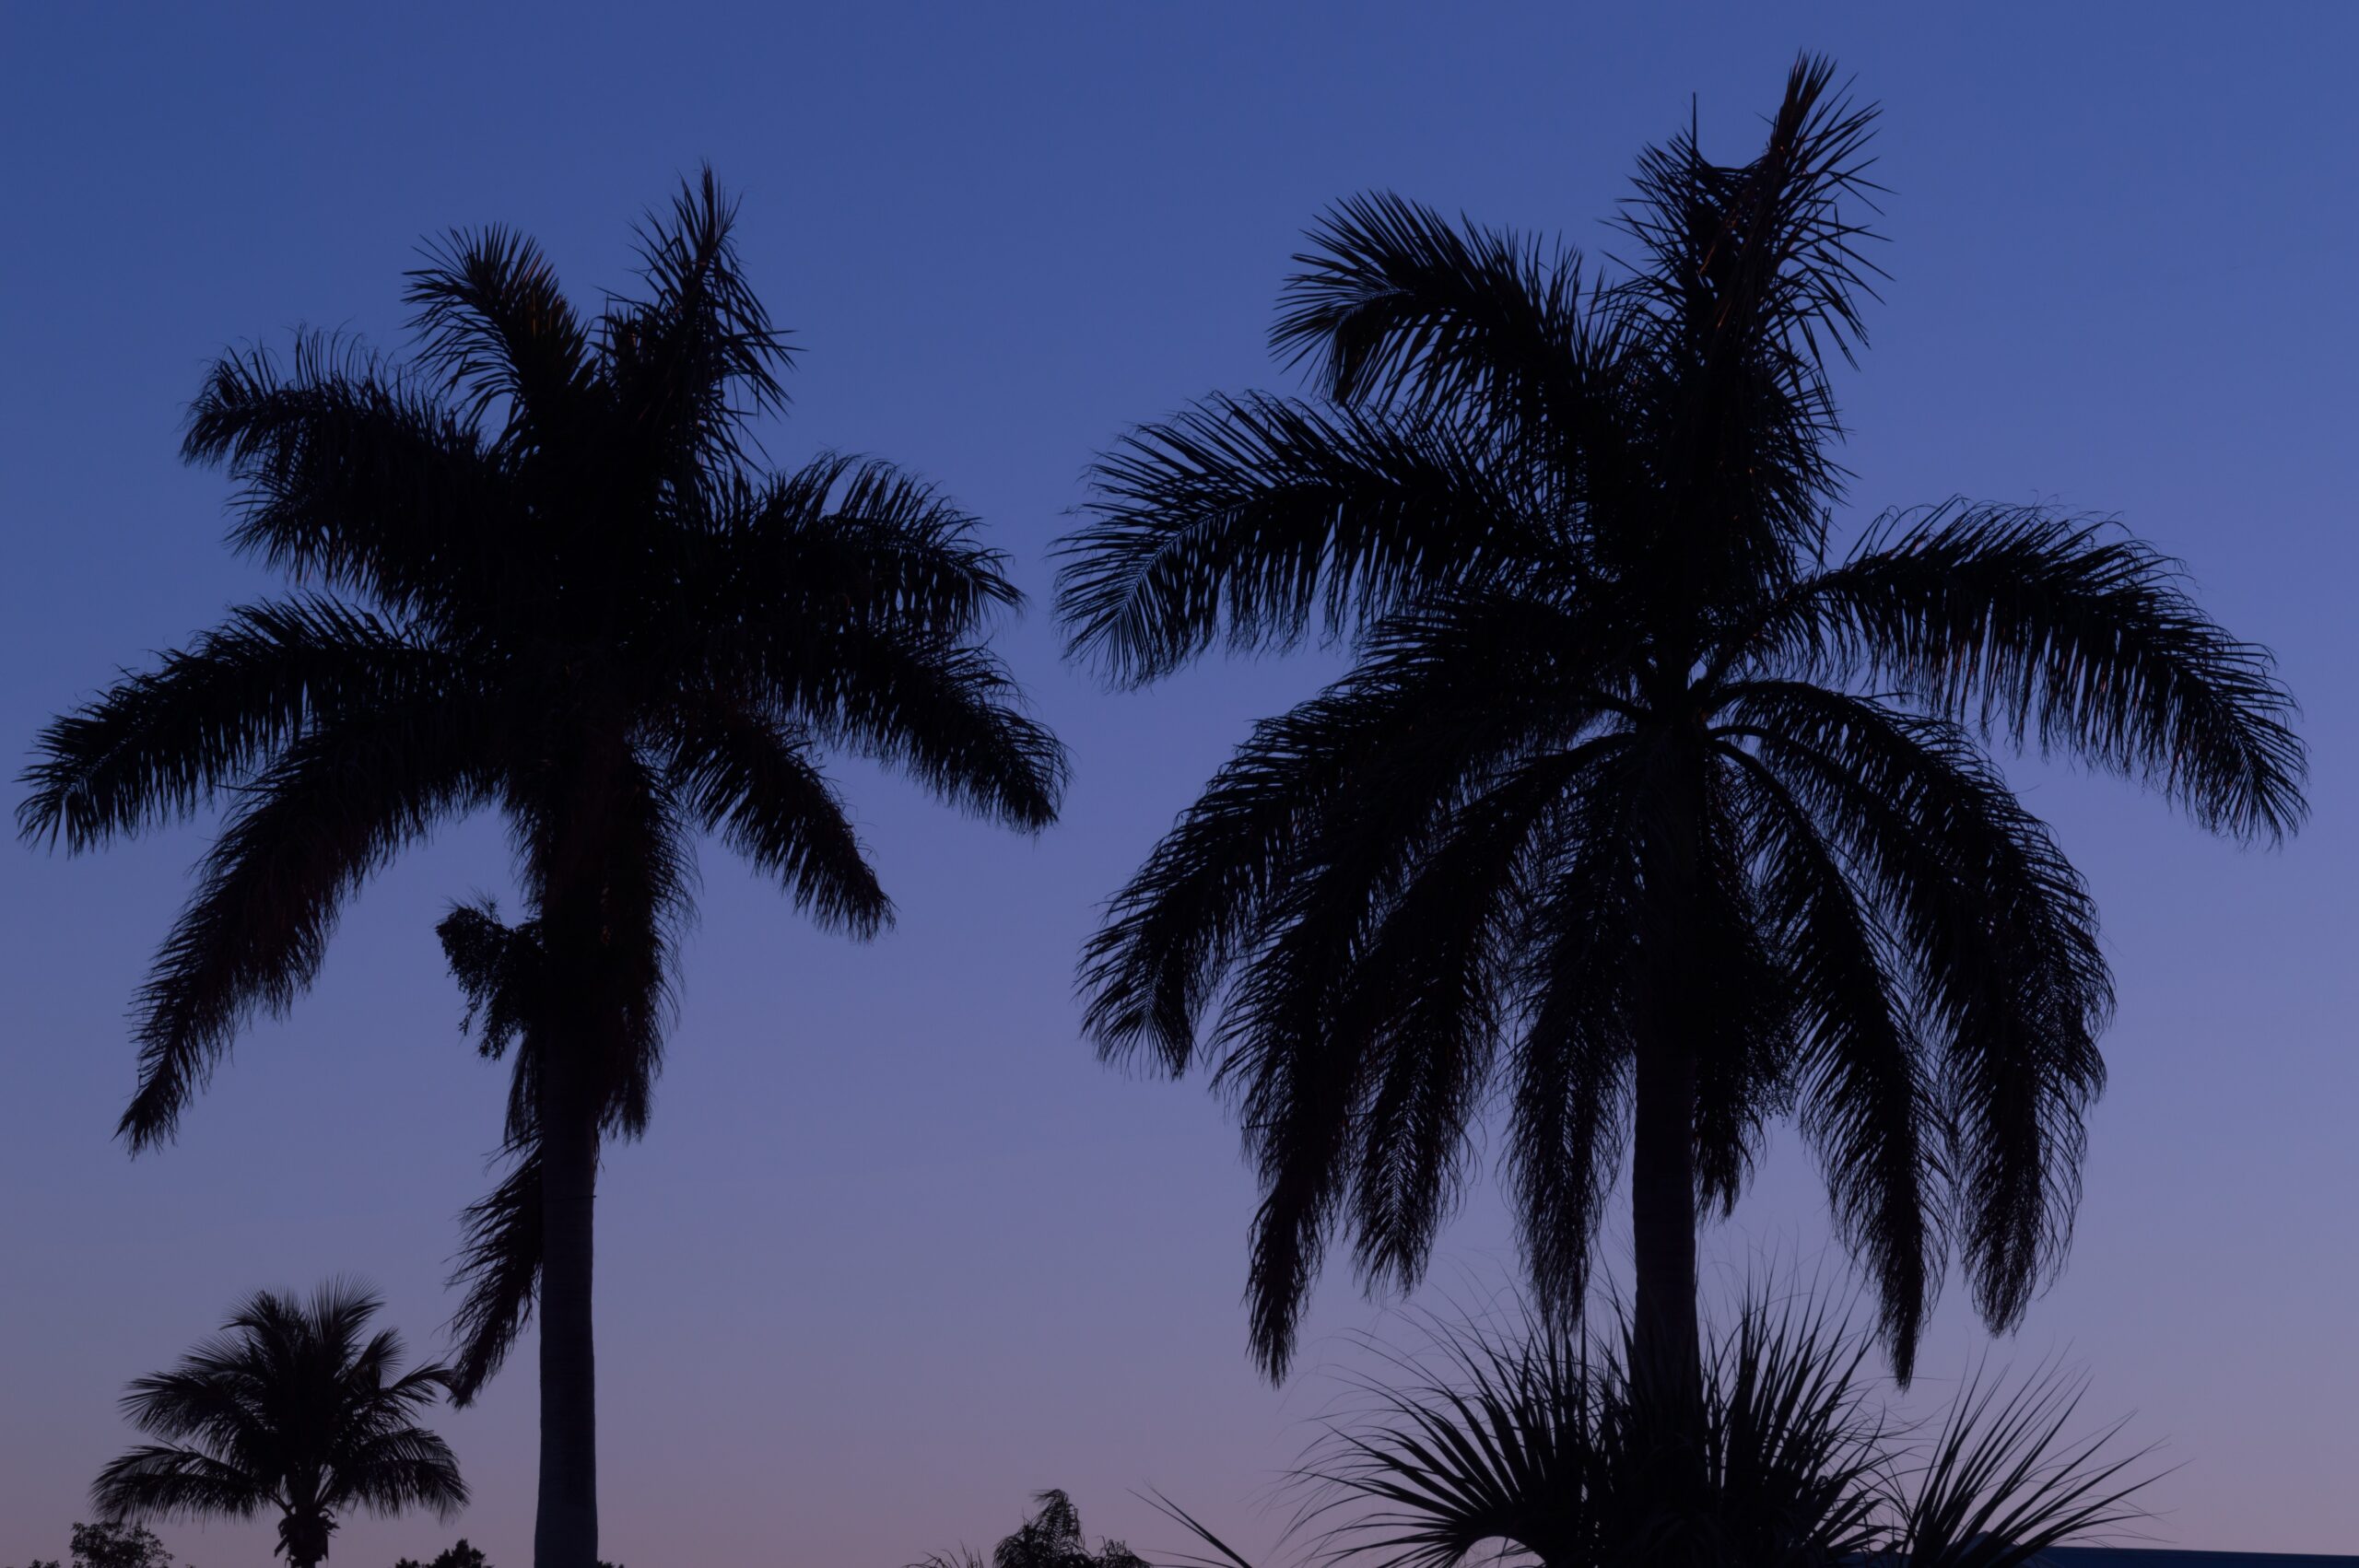 Palm trees against a Florida night sky.